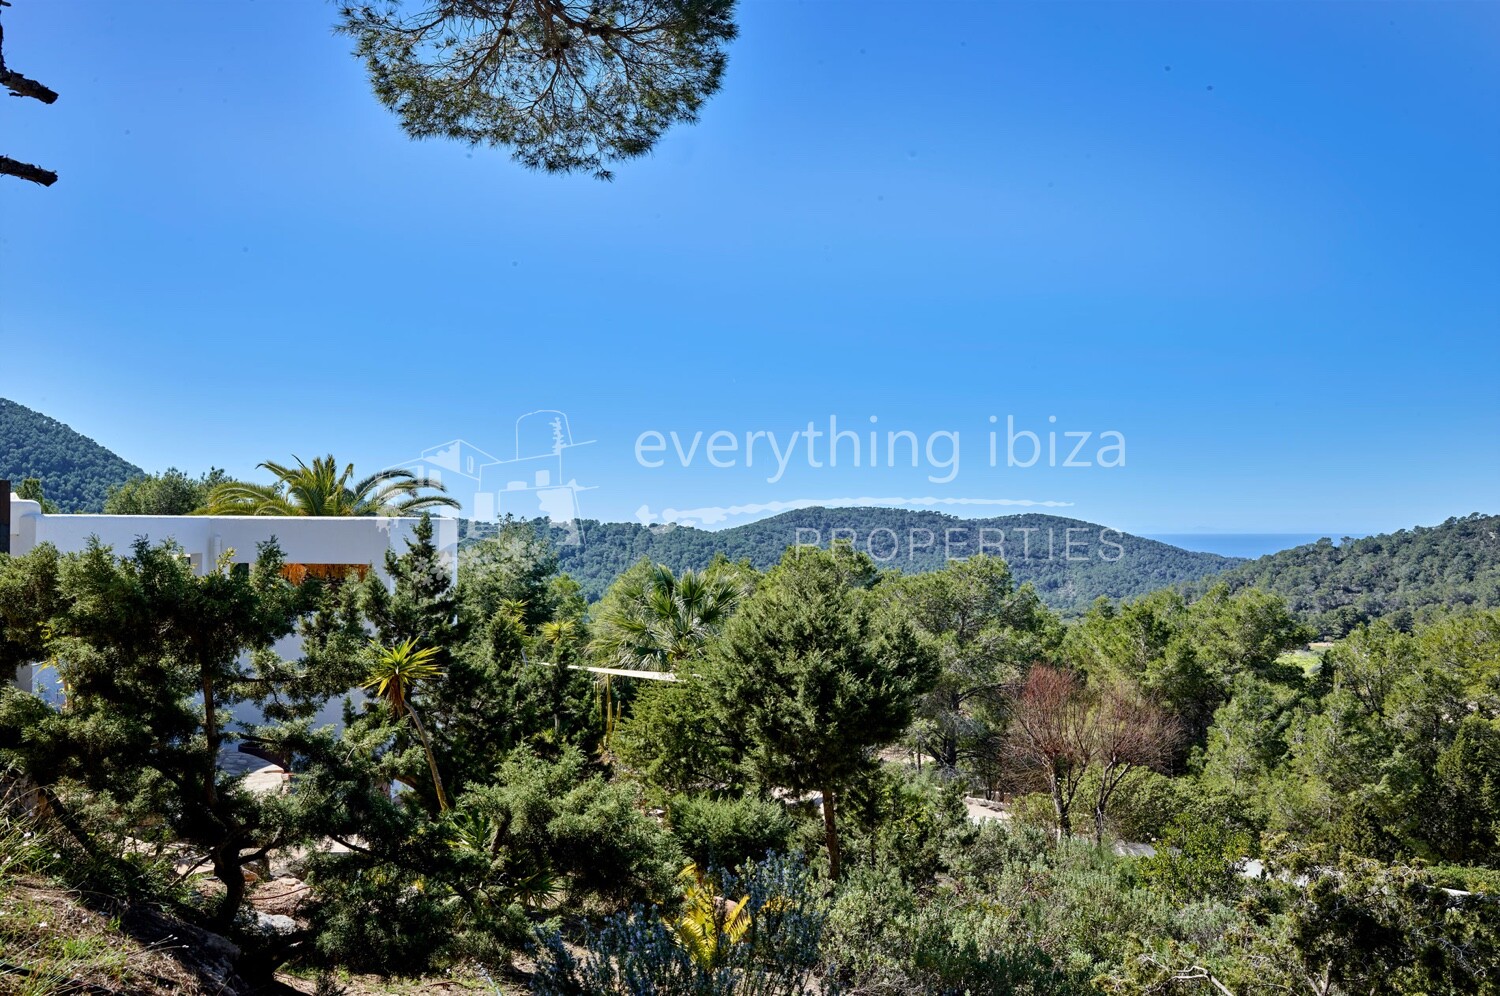 Elegant Detached Villa with Guest House & Super Views, ref. 1632, for sale in Ibiza by everything ibiza Properties